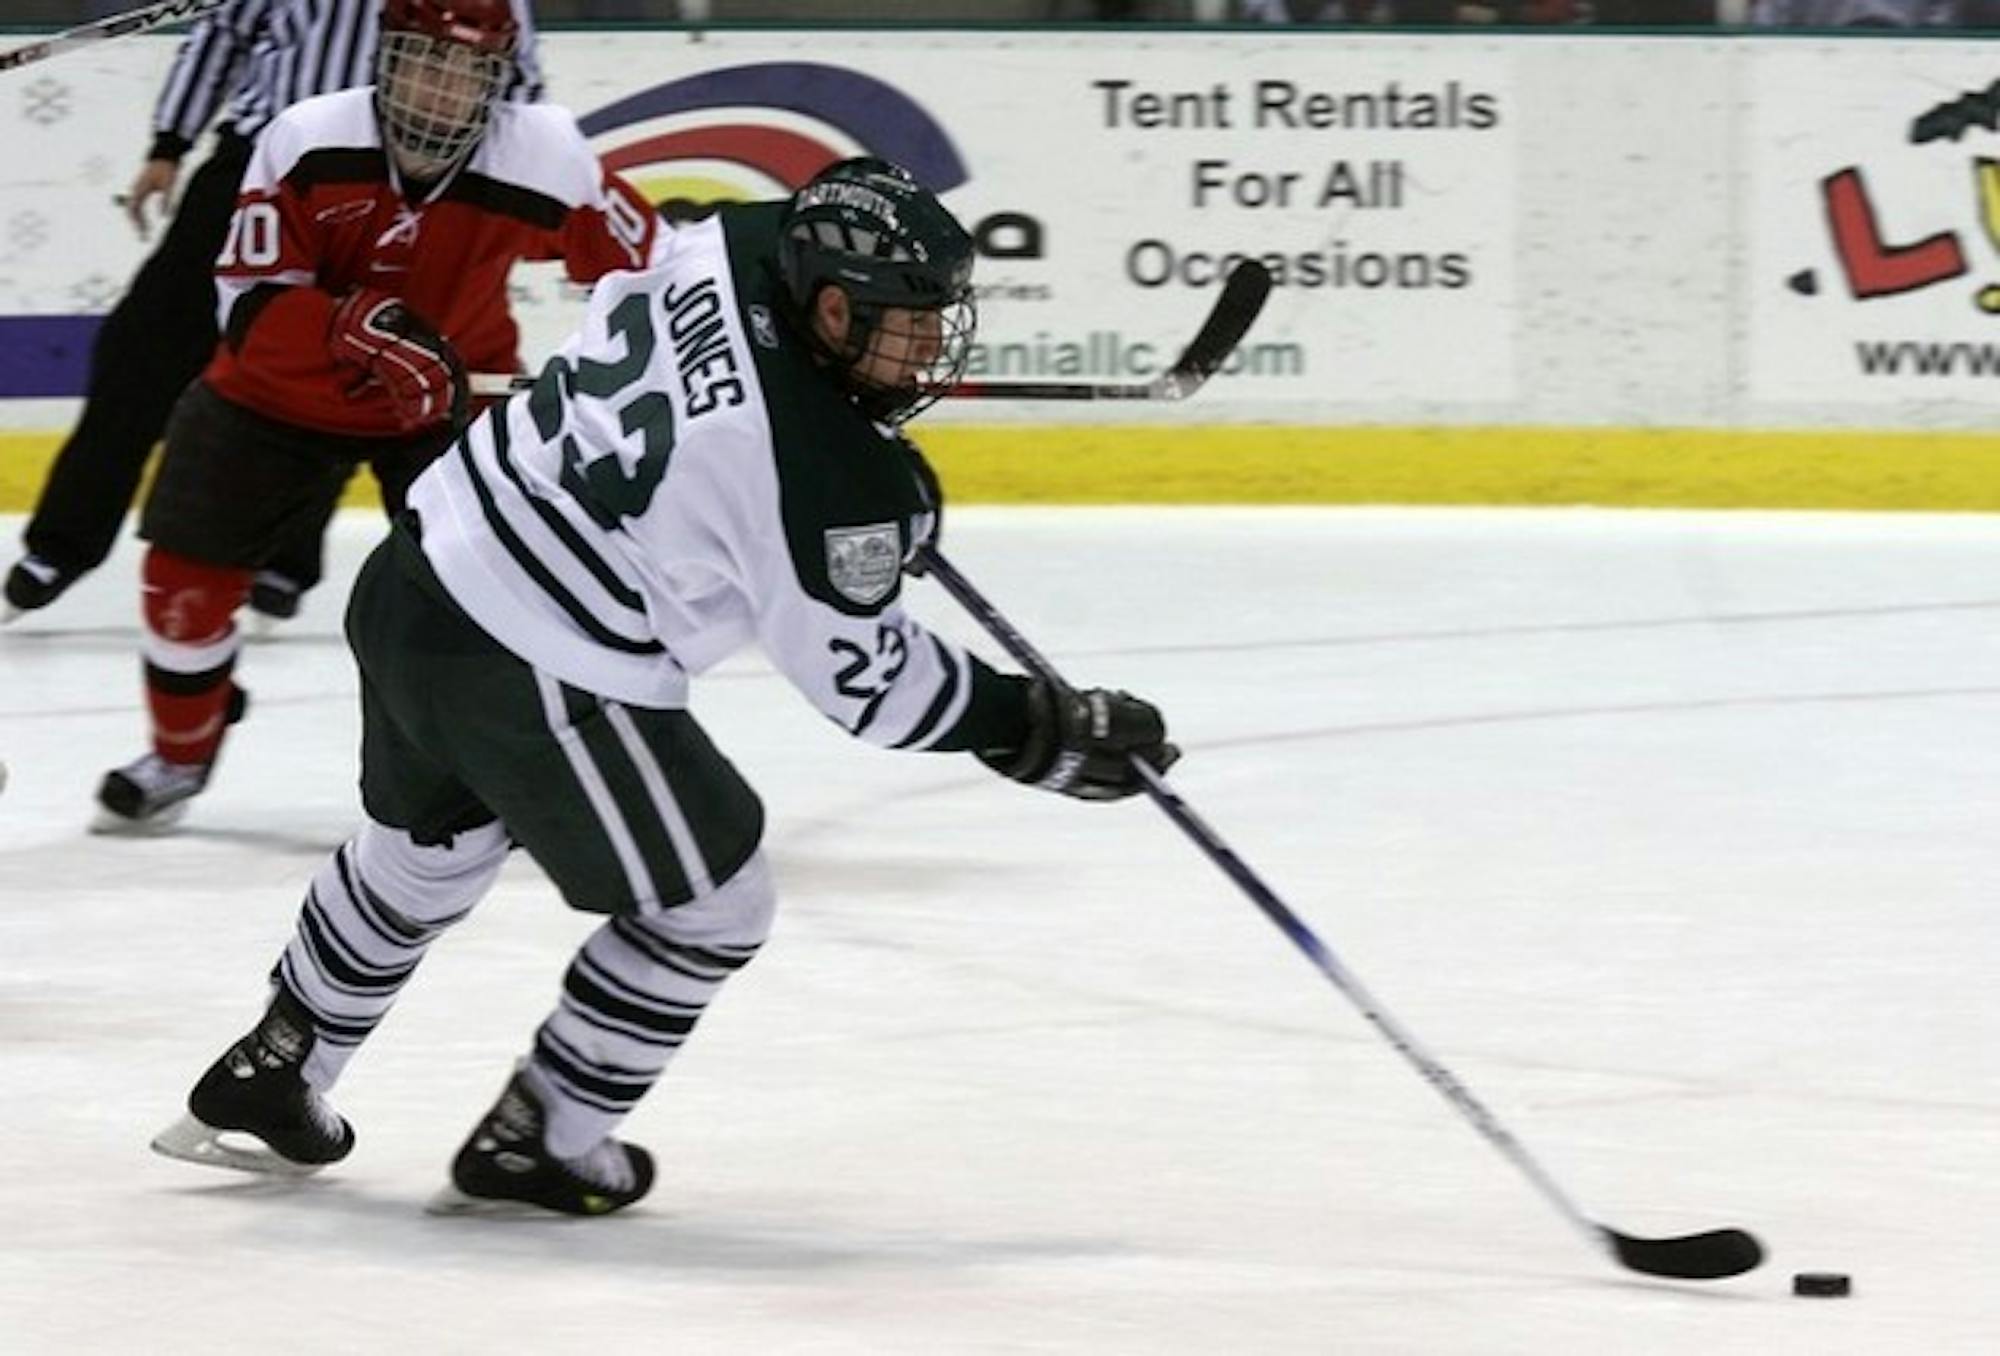 Men's hockey looked rejuvenated this weekend, toppling both Colgate and 11th-ranked Cornell on the road.